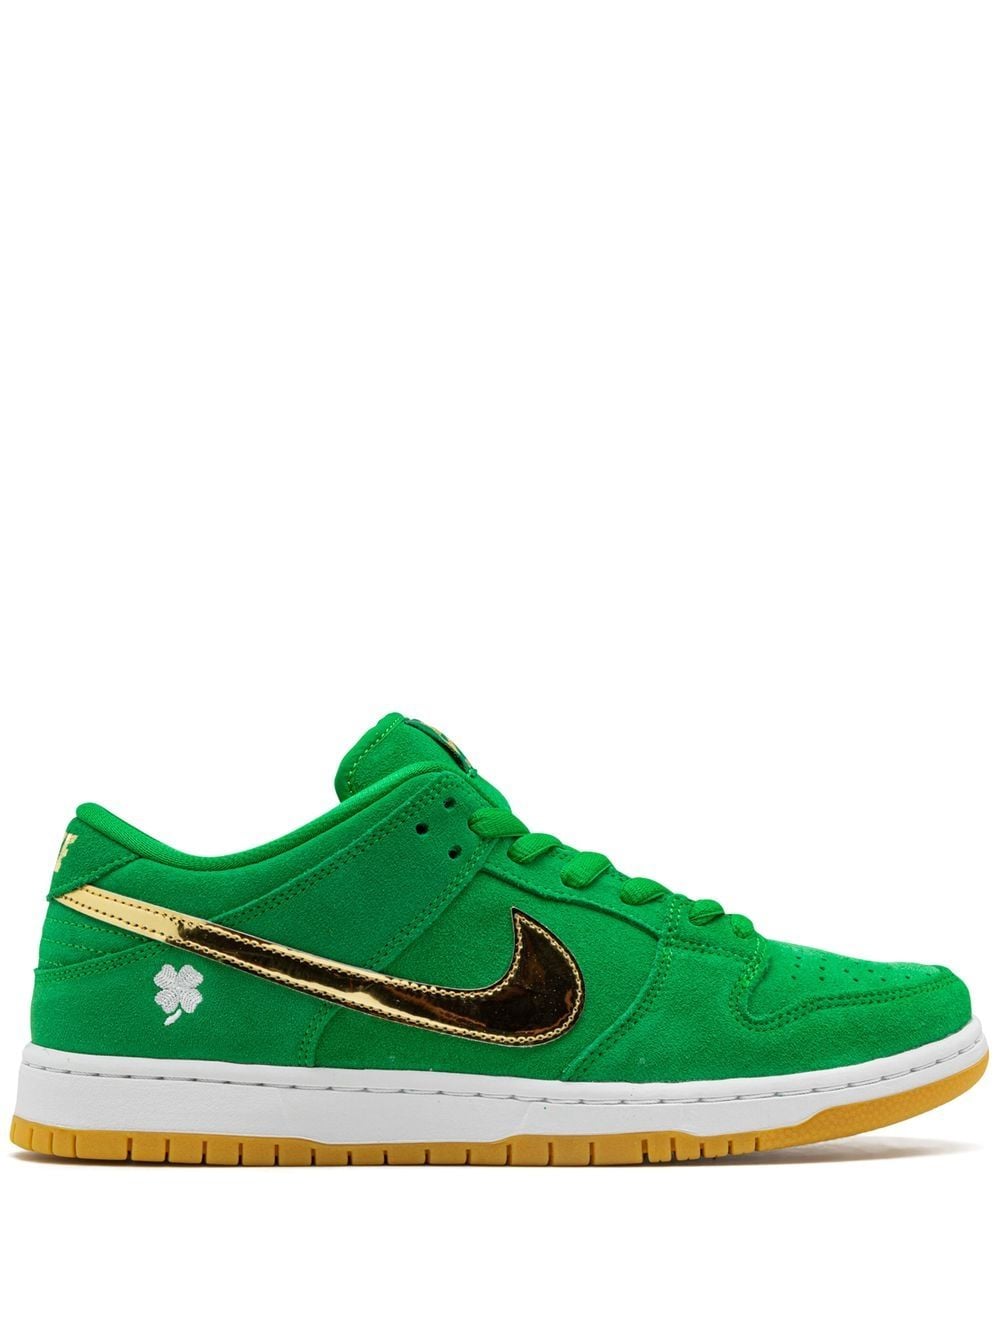 Image 1 of Nike SB Dunk Low Pro "St. Patrick's Day" sneakers